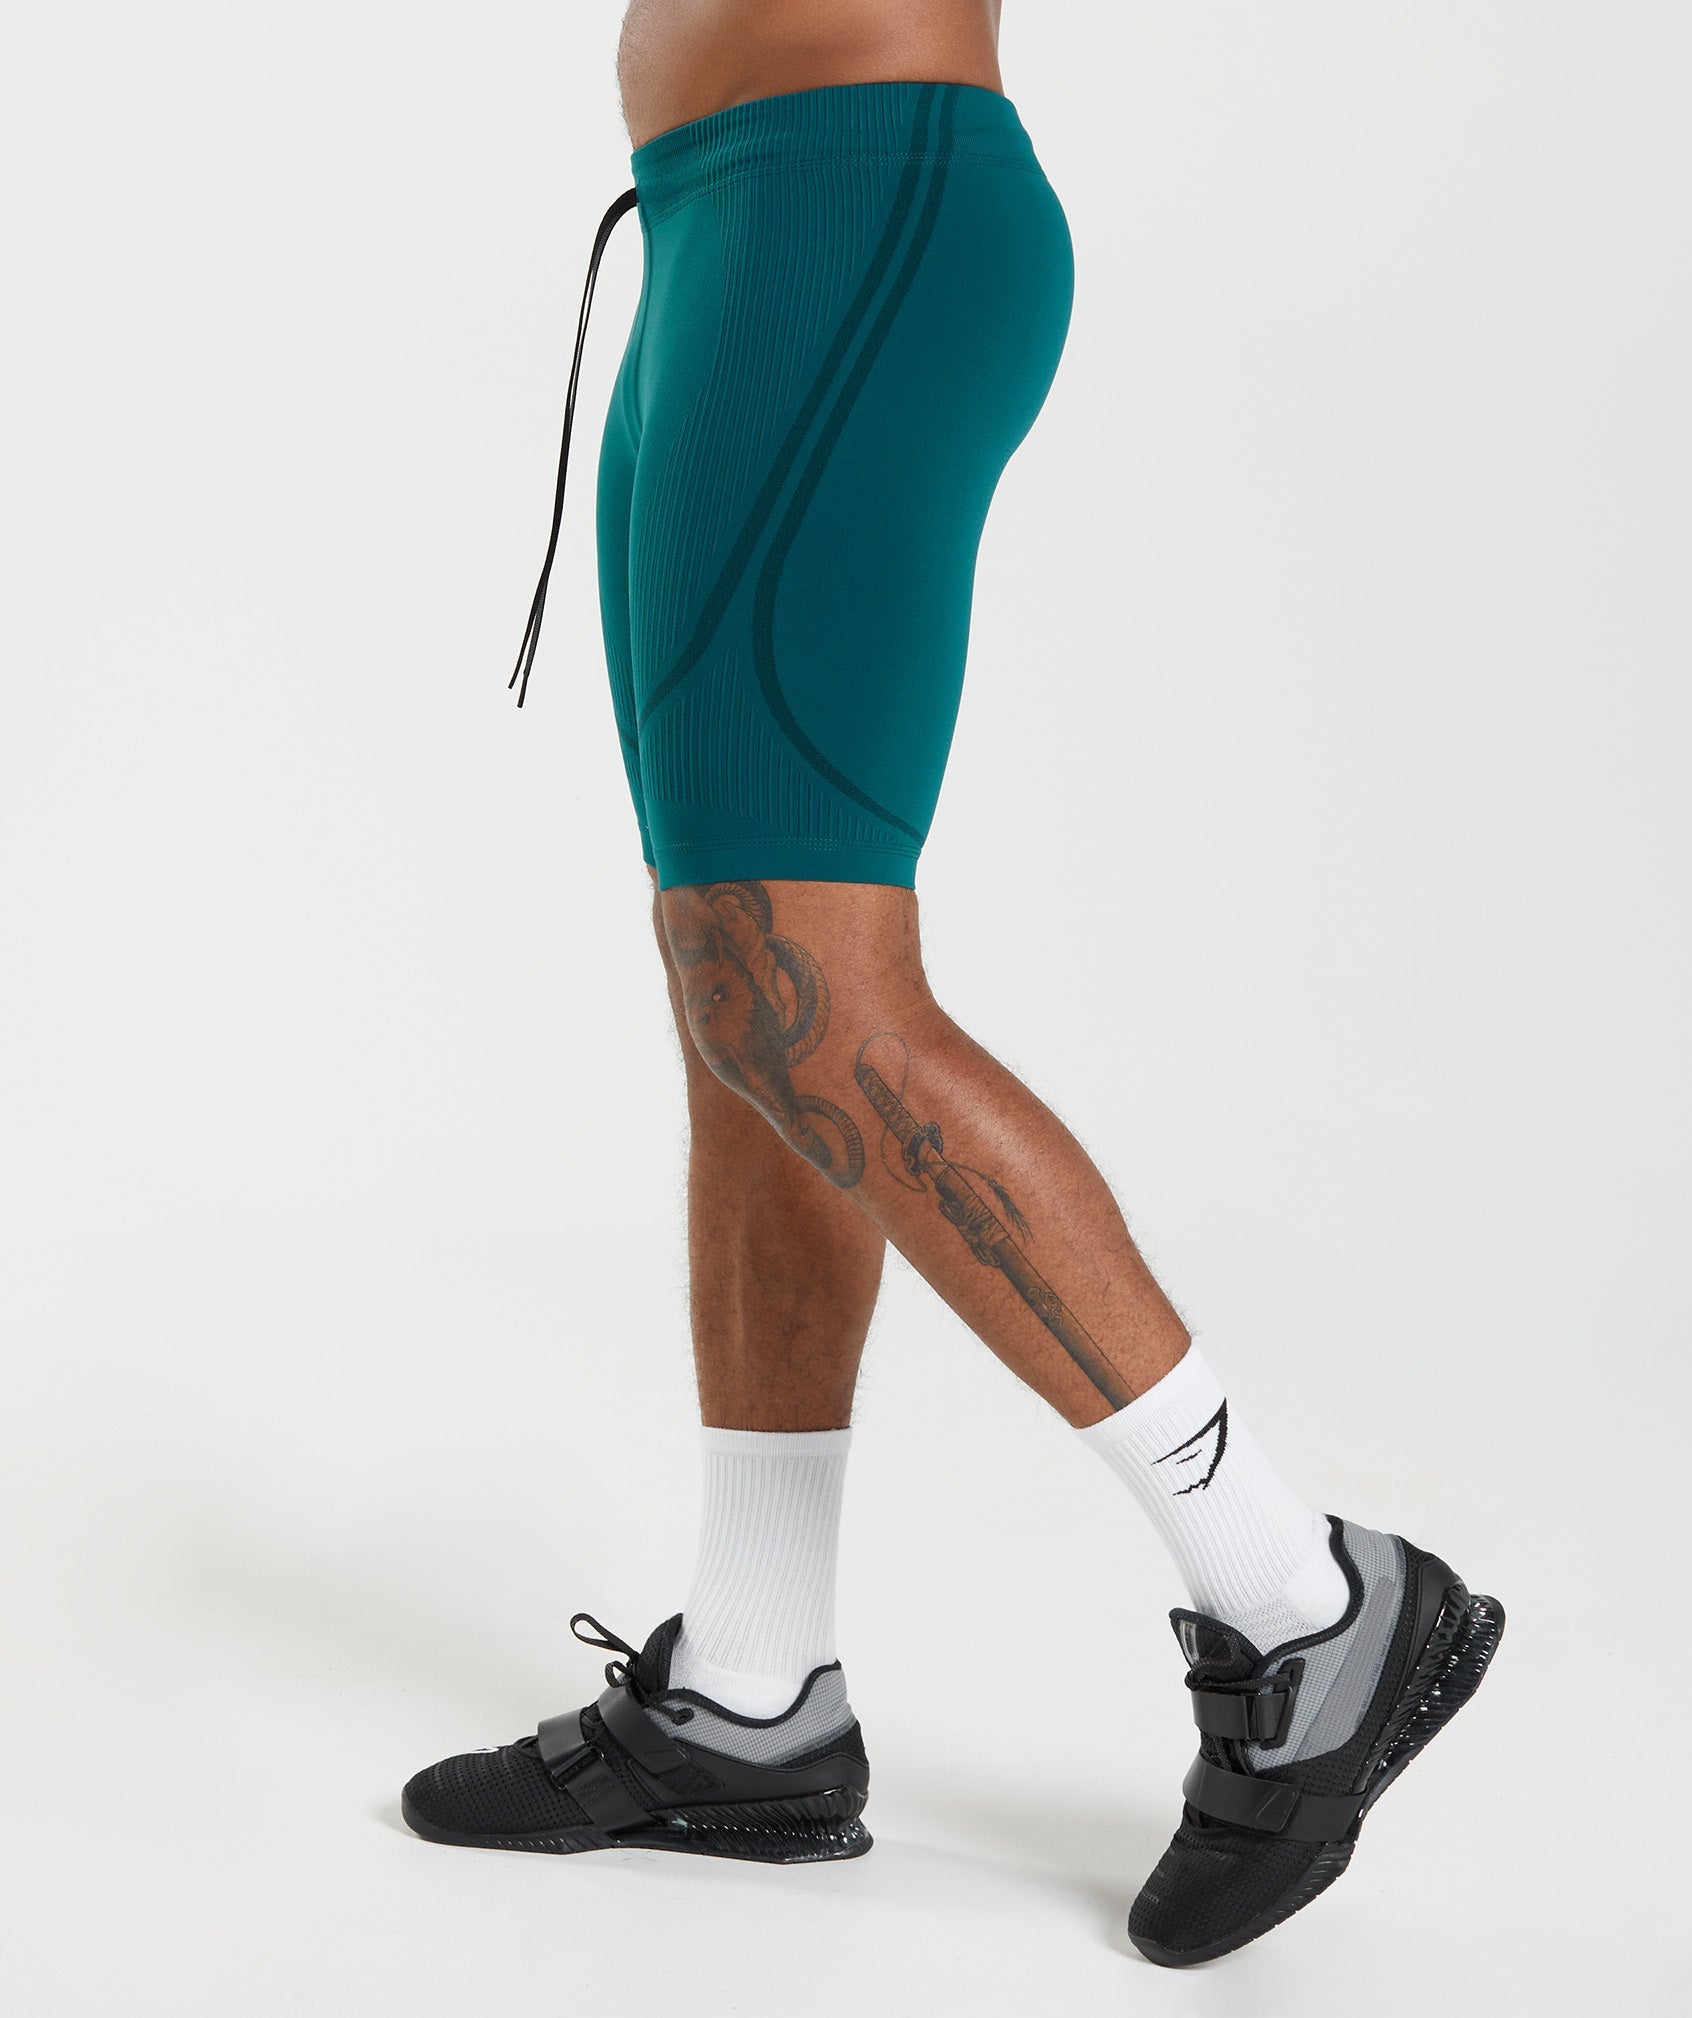 315 Seamless 1/2 Shorts in Winter Teal/Black